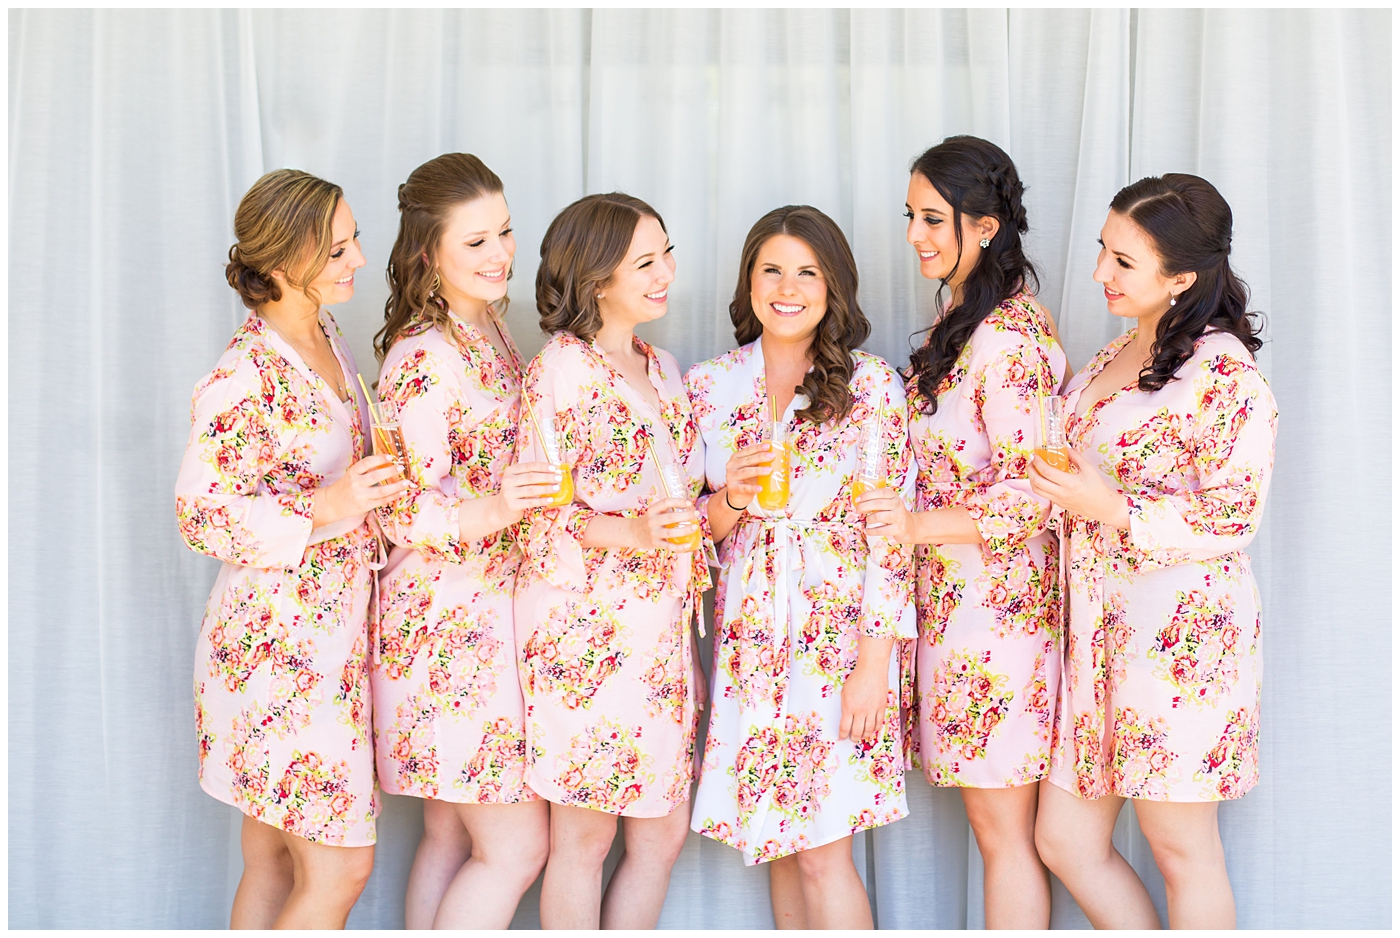 bride in white robe with pink flowers with bridesmaids in pink with flower robes getting ready on wedding day